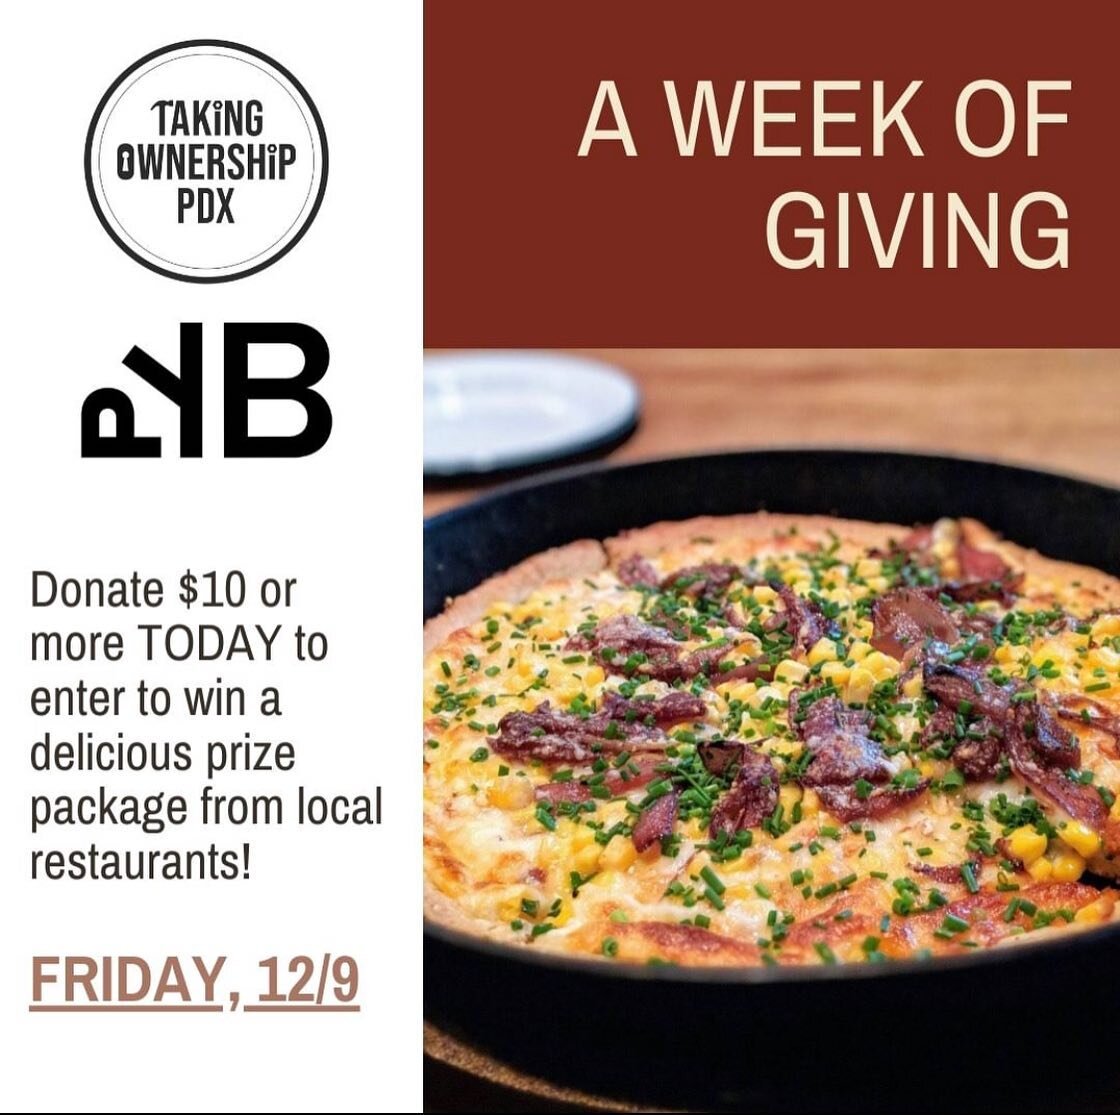 It's Friday and we're wrapping up our Week of Giving with TWO great raffles!

Donate $10 or more to be entered to win a dining package that will have you savoring the best of Portland's food and beverage scene. Enjoy a cozy coffee and pastries with a